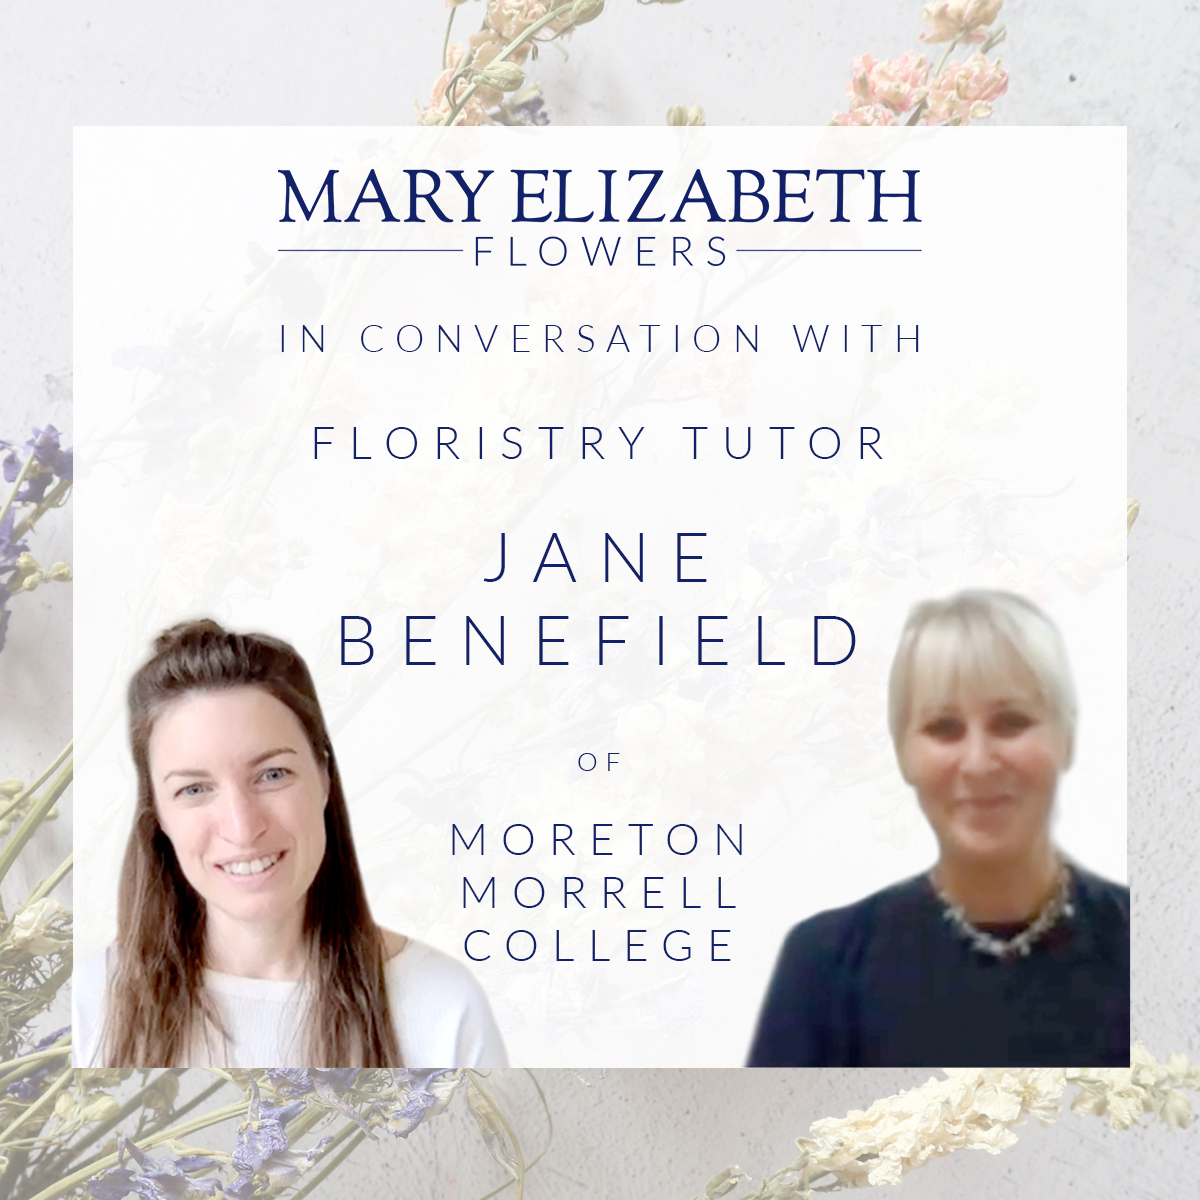 Mary Elizabeth Flowers In Conversation with Jane Benefield Blog